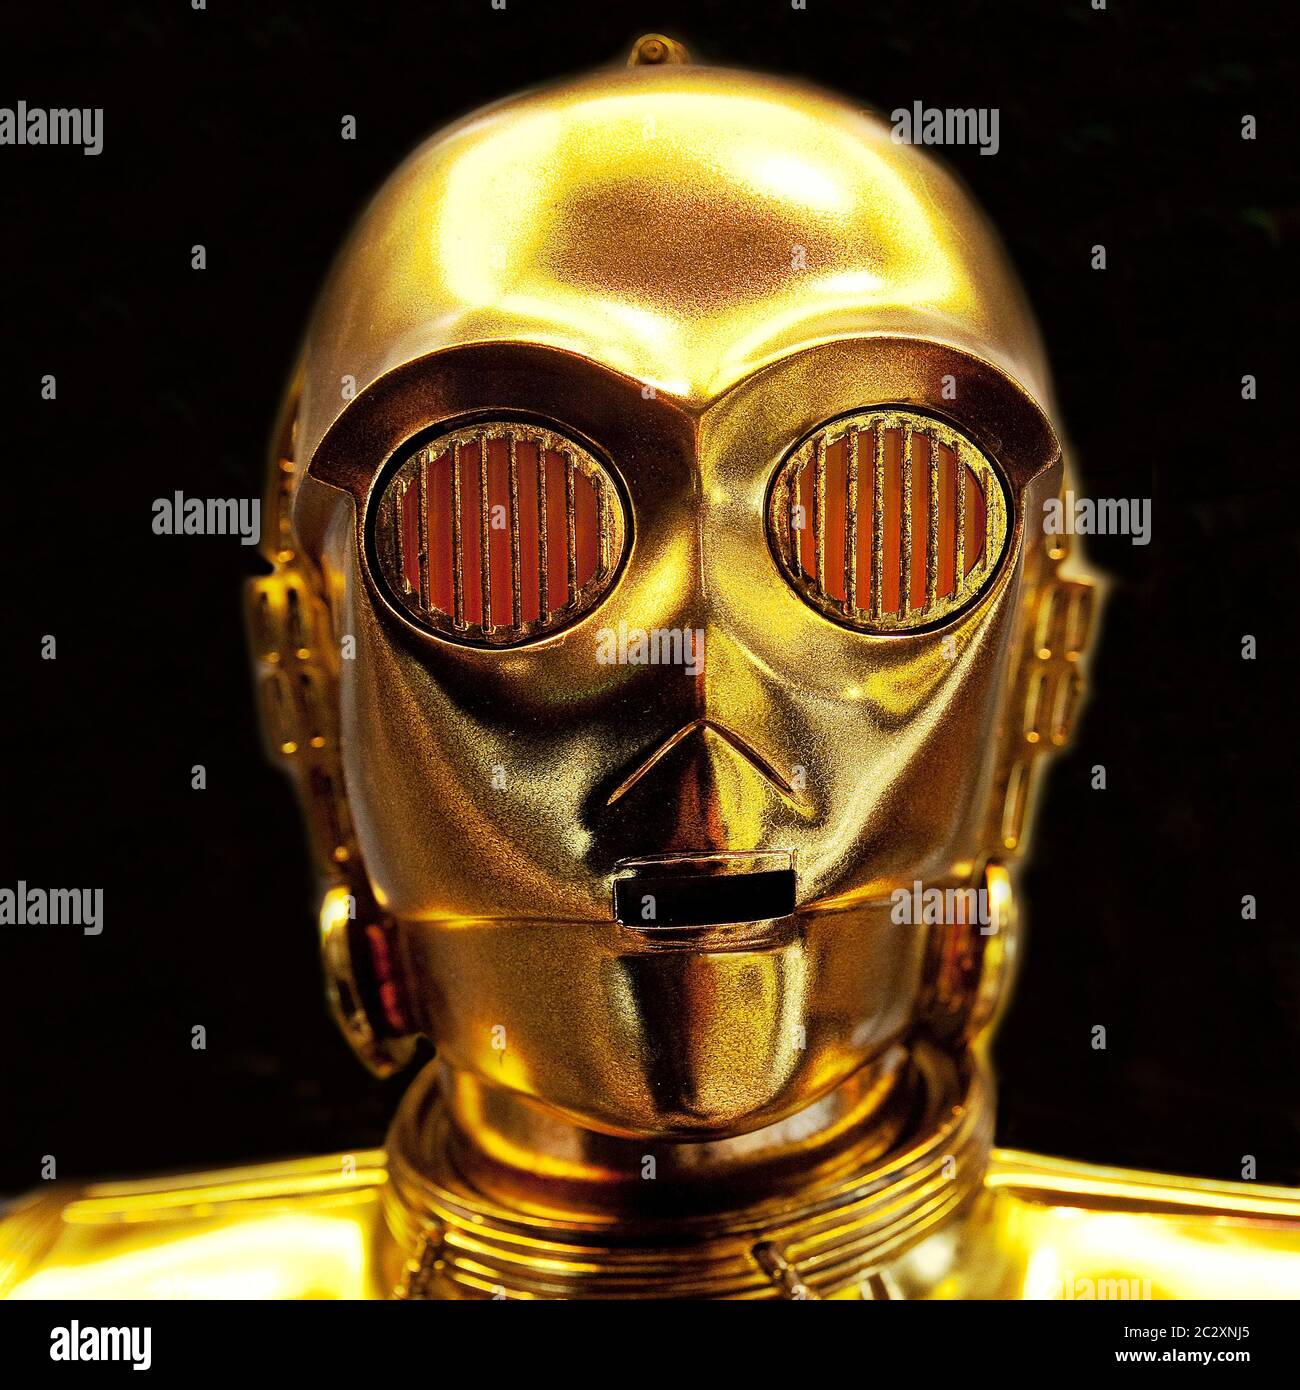 C-3PO, Protocol Droid, replica of the humanoid robot figure from the movie Star Wars, Germany Stock Photo